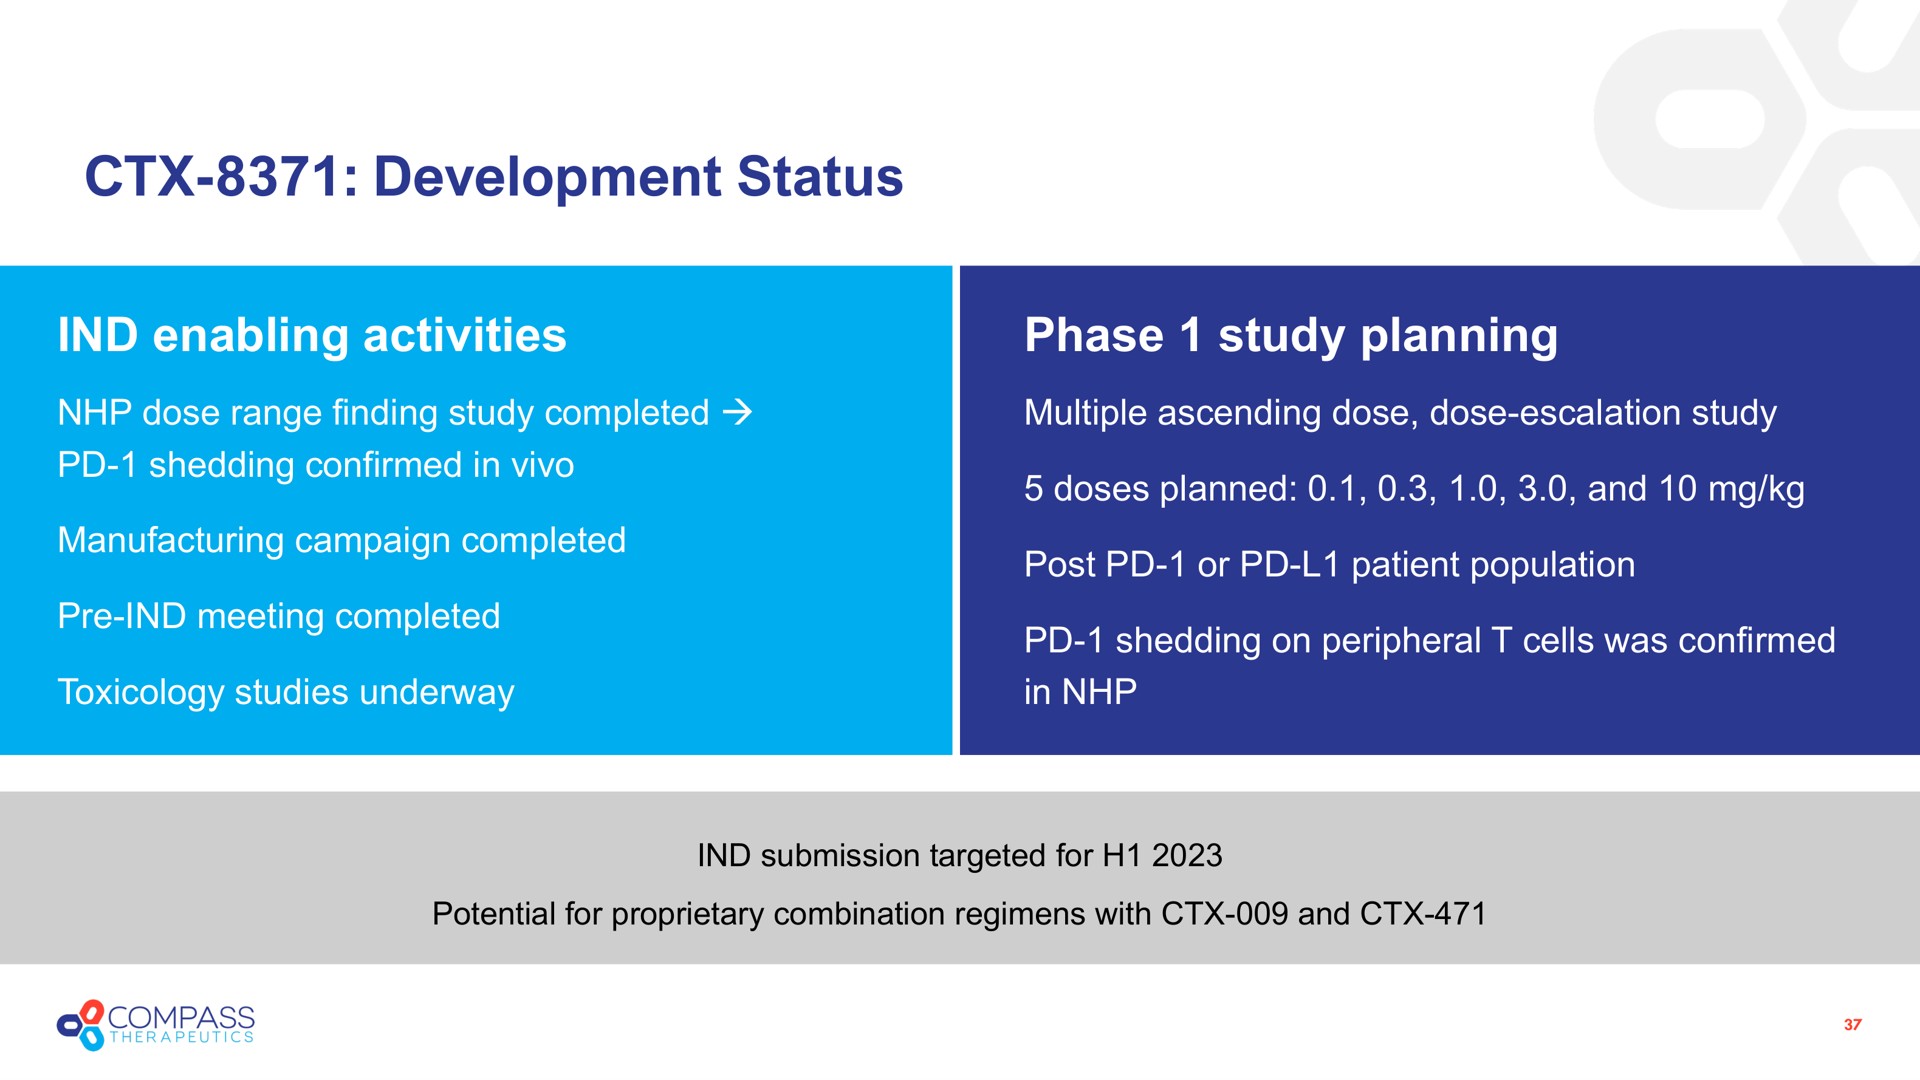 development status enabling activities phase study planning an rod dere a a a | Compass Therapeutics